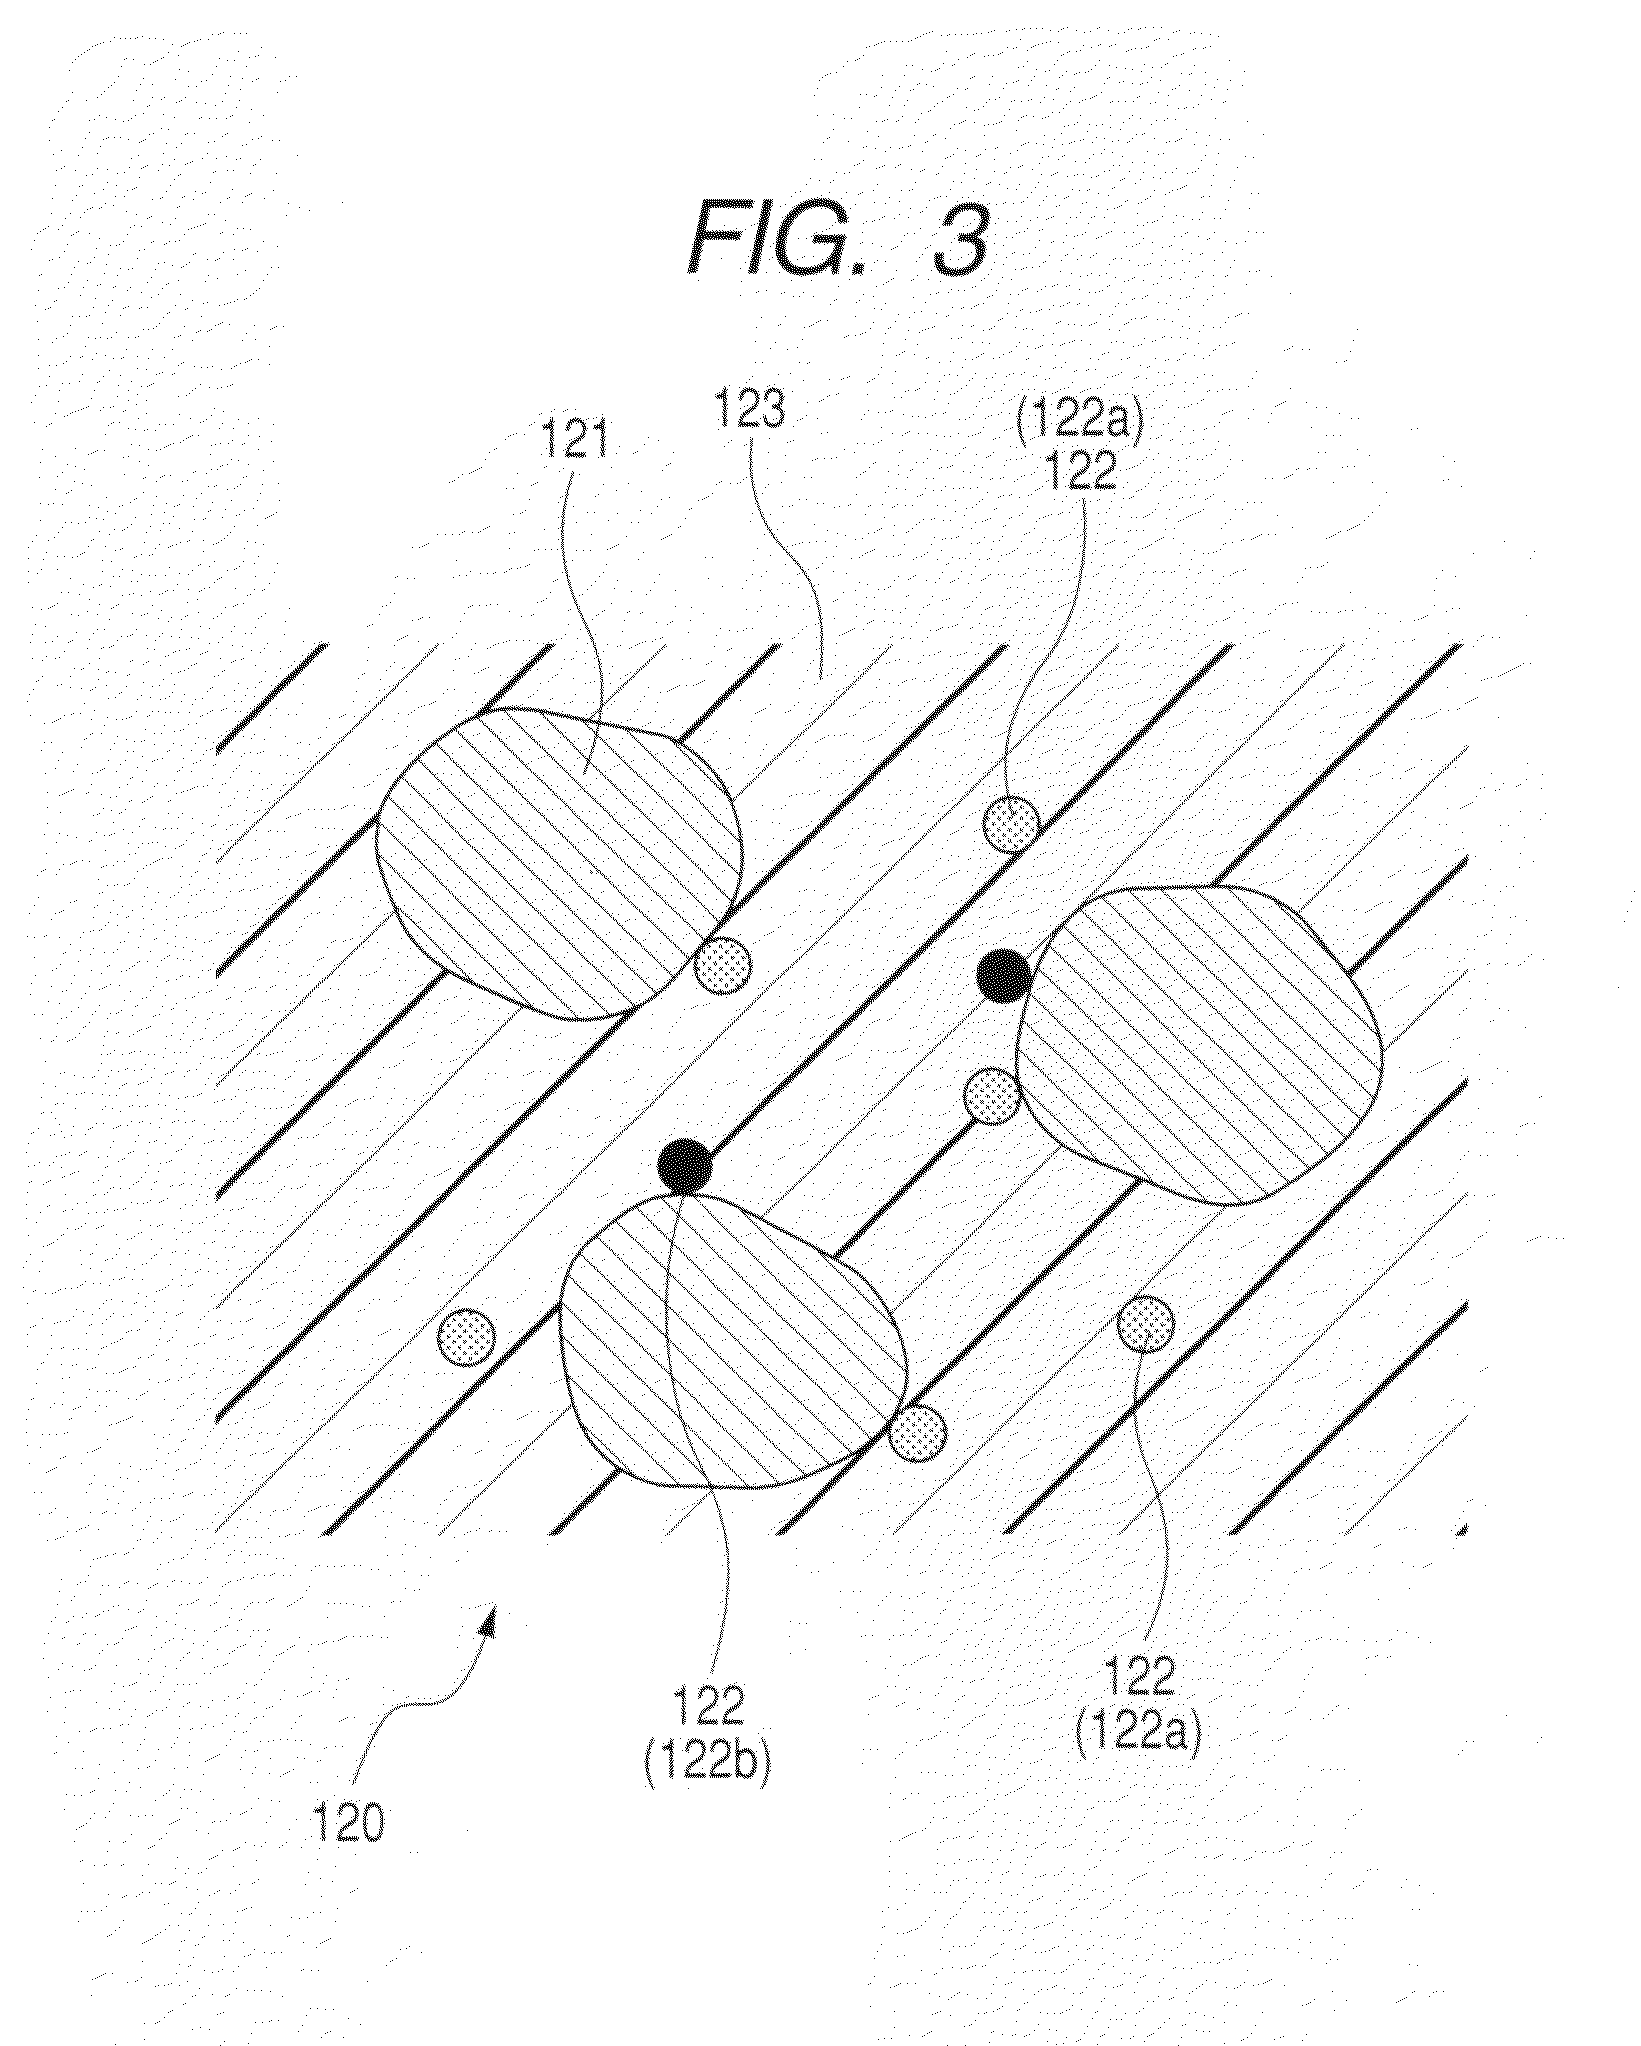 Reactor and method of producing the reactor